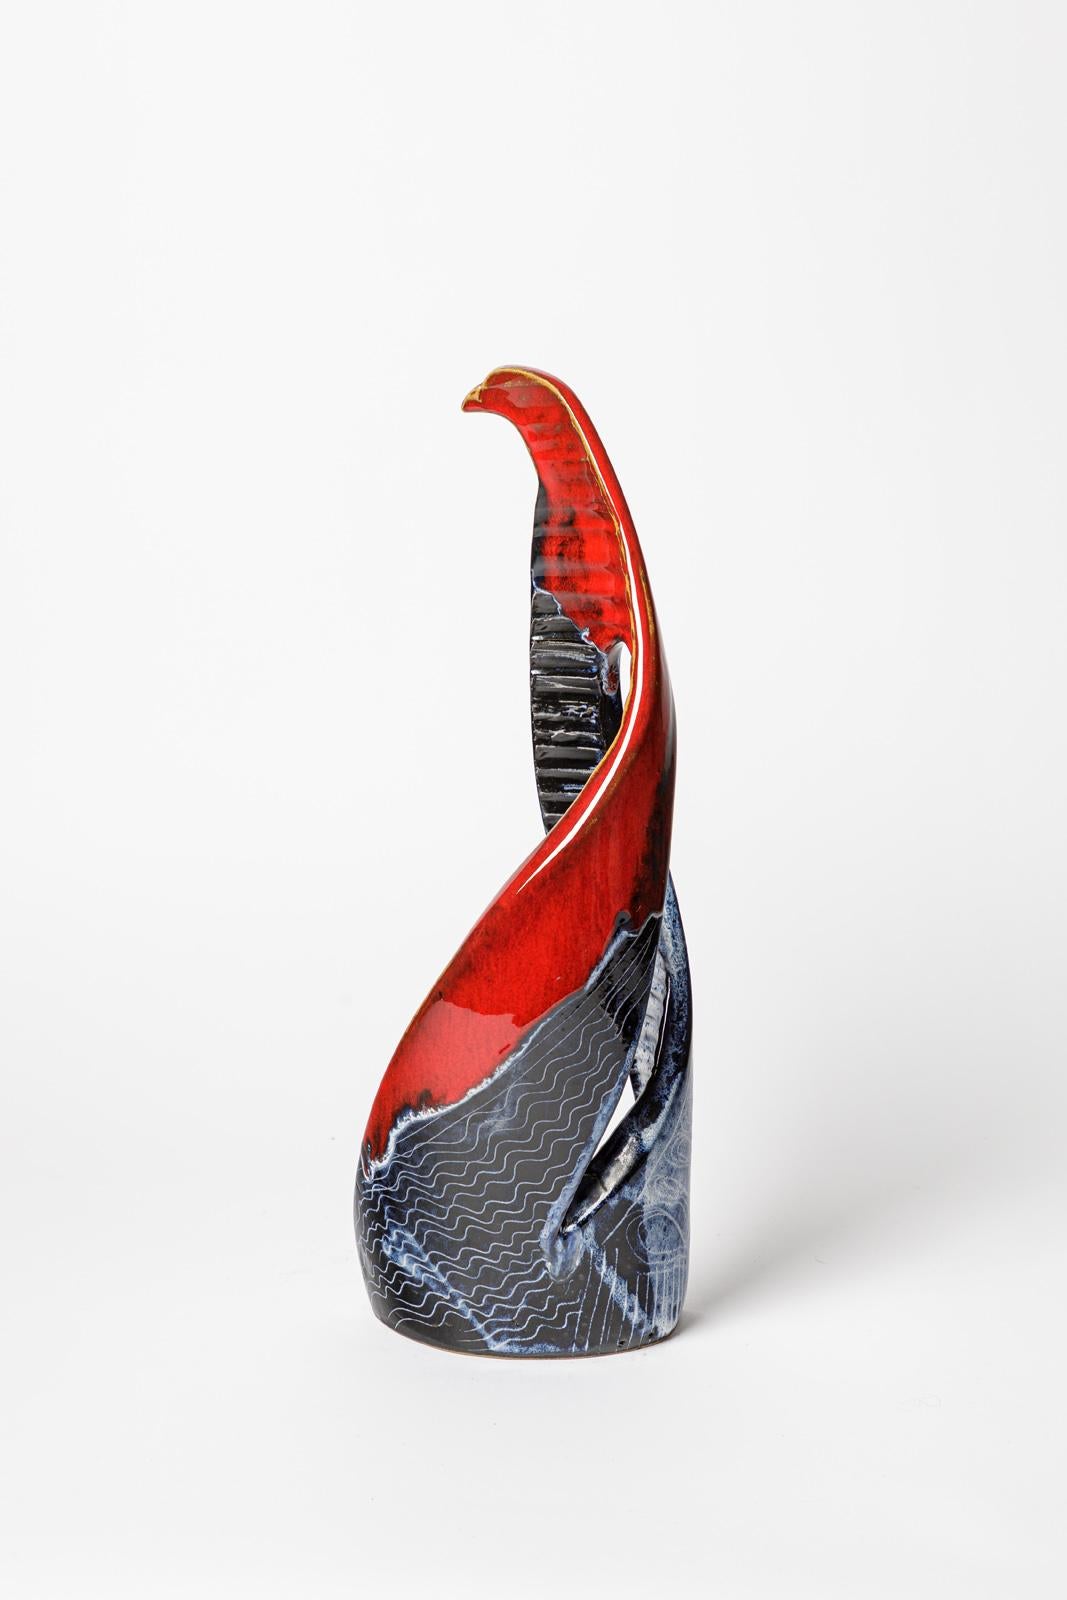 Mid-Century Modern Red and Blue 20th Century Abstract Ceramic Bird Sculpture by Jean Austruy 1950 For Sale